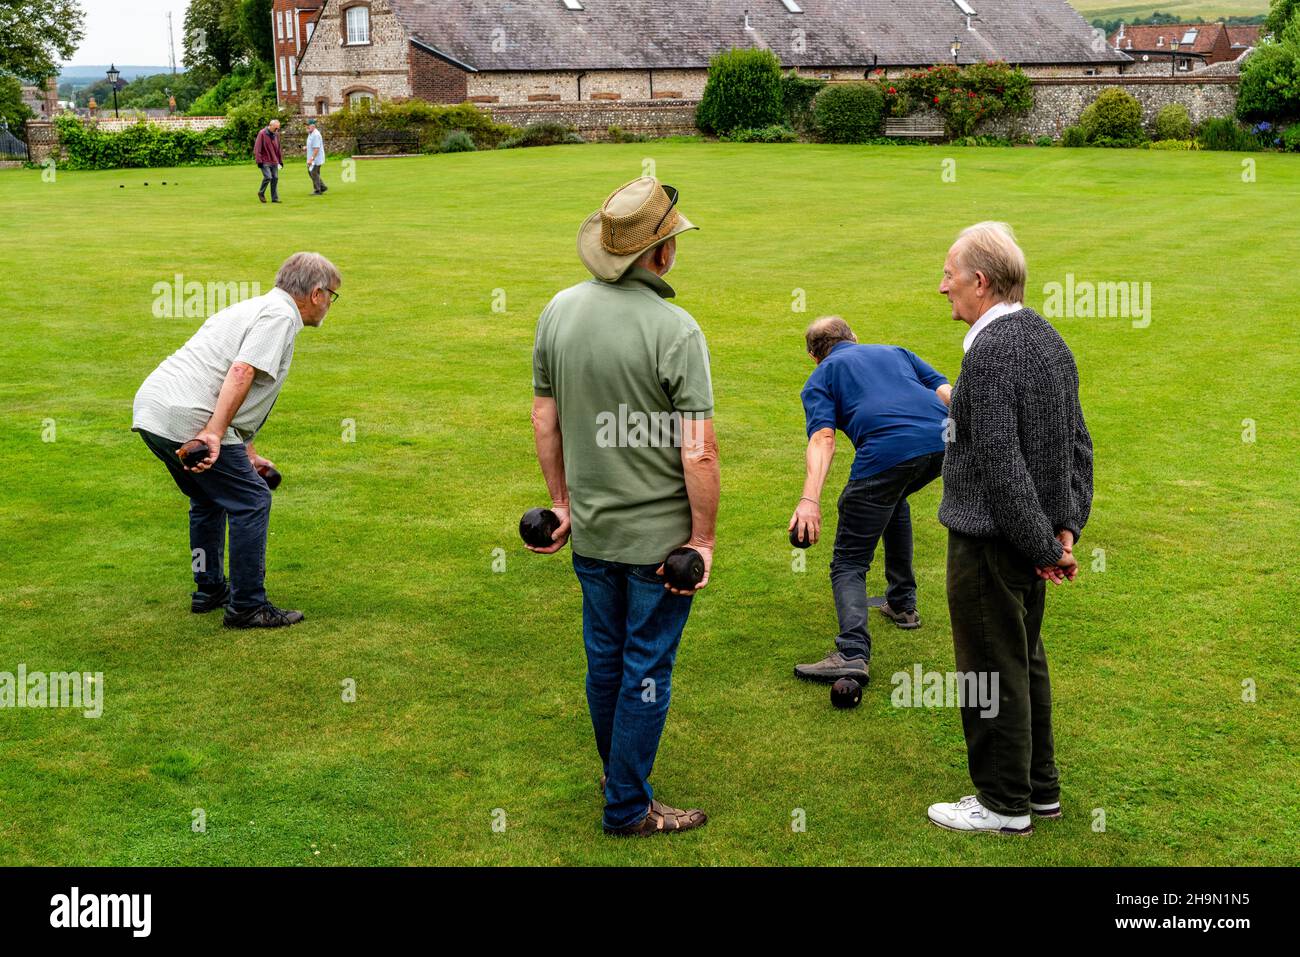 Every Saturday Groups Of Local Men Play A Form Of Bowls Similar To That Played In The 16th Century On The Castle Bowling Green, Lewes, East Sussex, UK Stock Photo